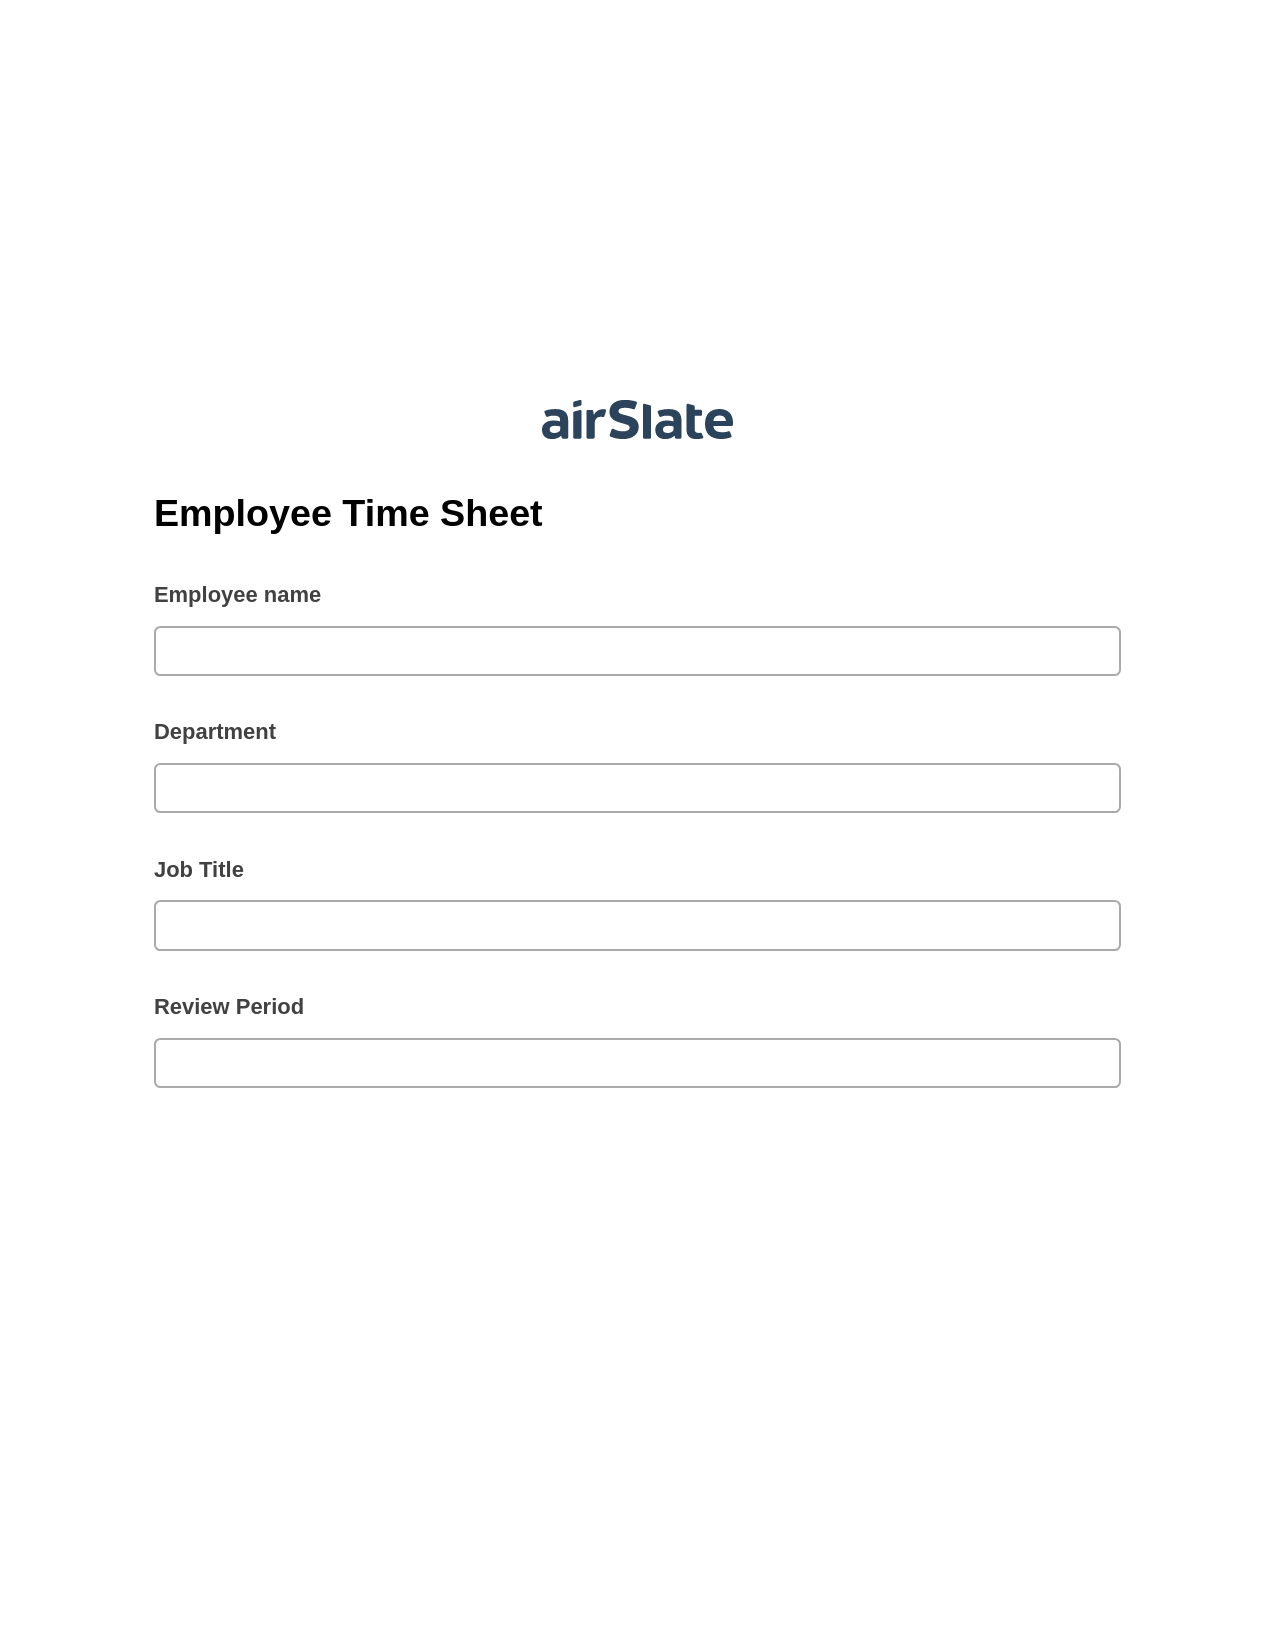 Employee Time Sheet Pre-fill from CSV File Bot, Create Salesforce Records Bot, Export to NetSuite Bot